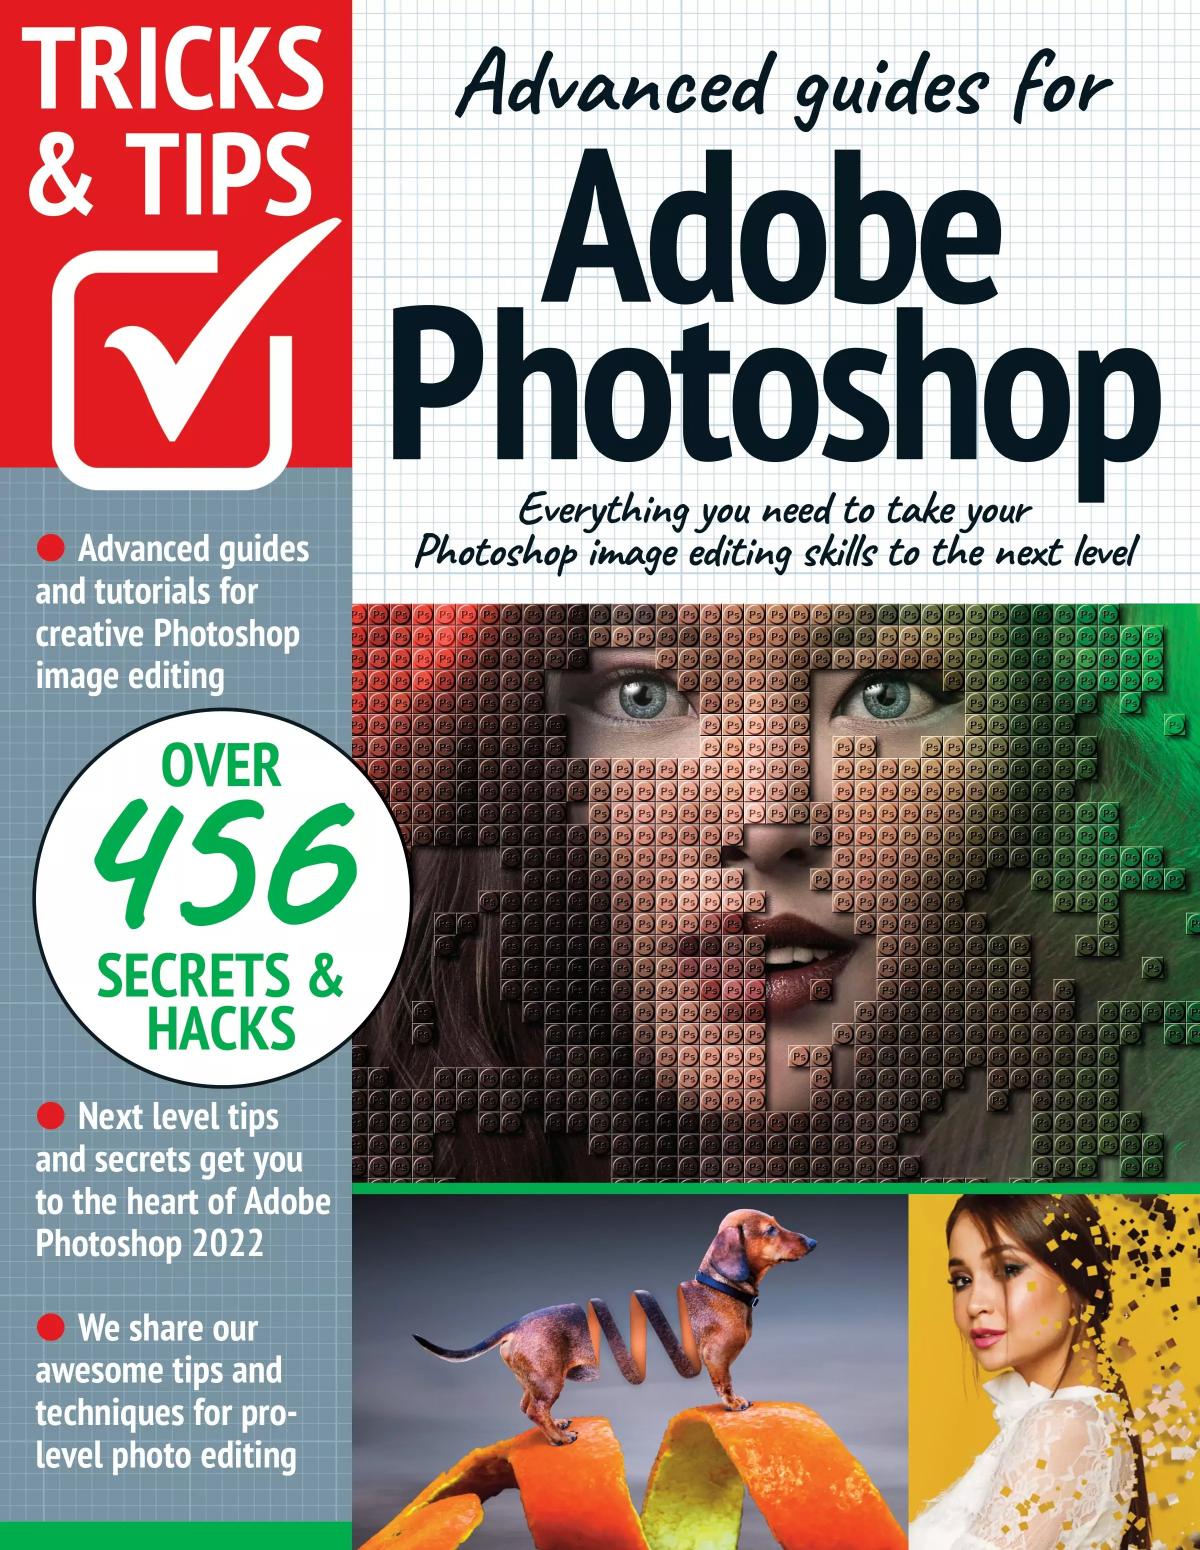 Adobe Photoshop Tricks and Tips by 10th Edition 20